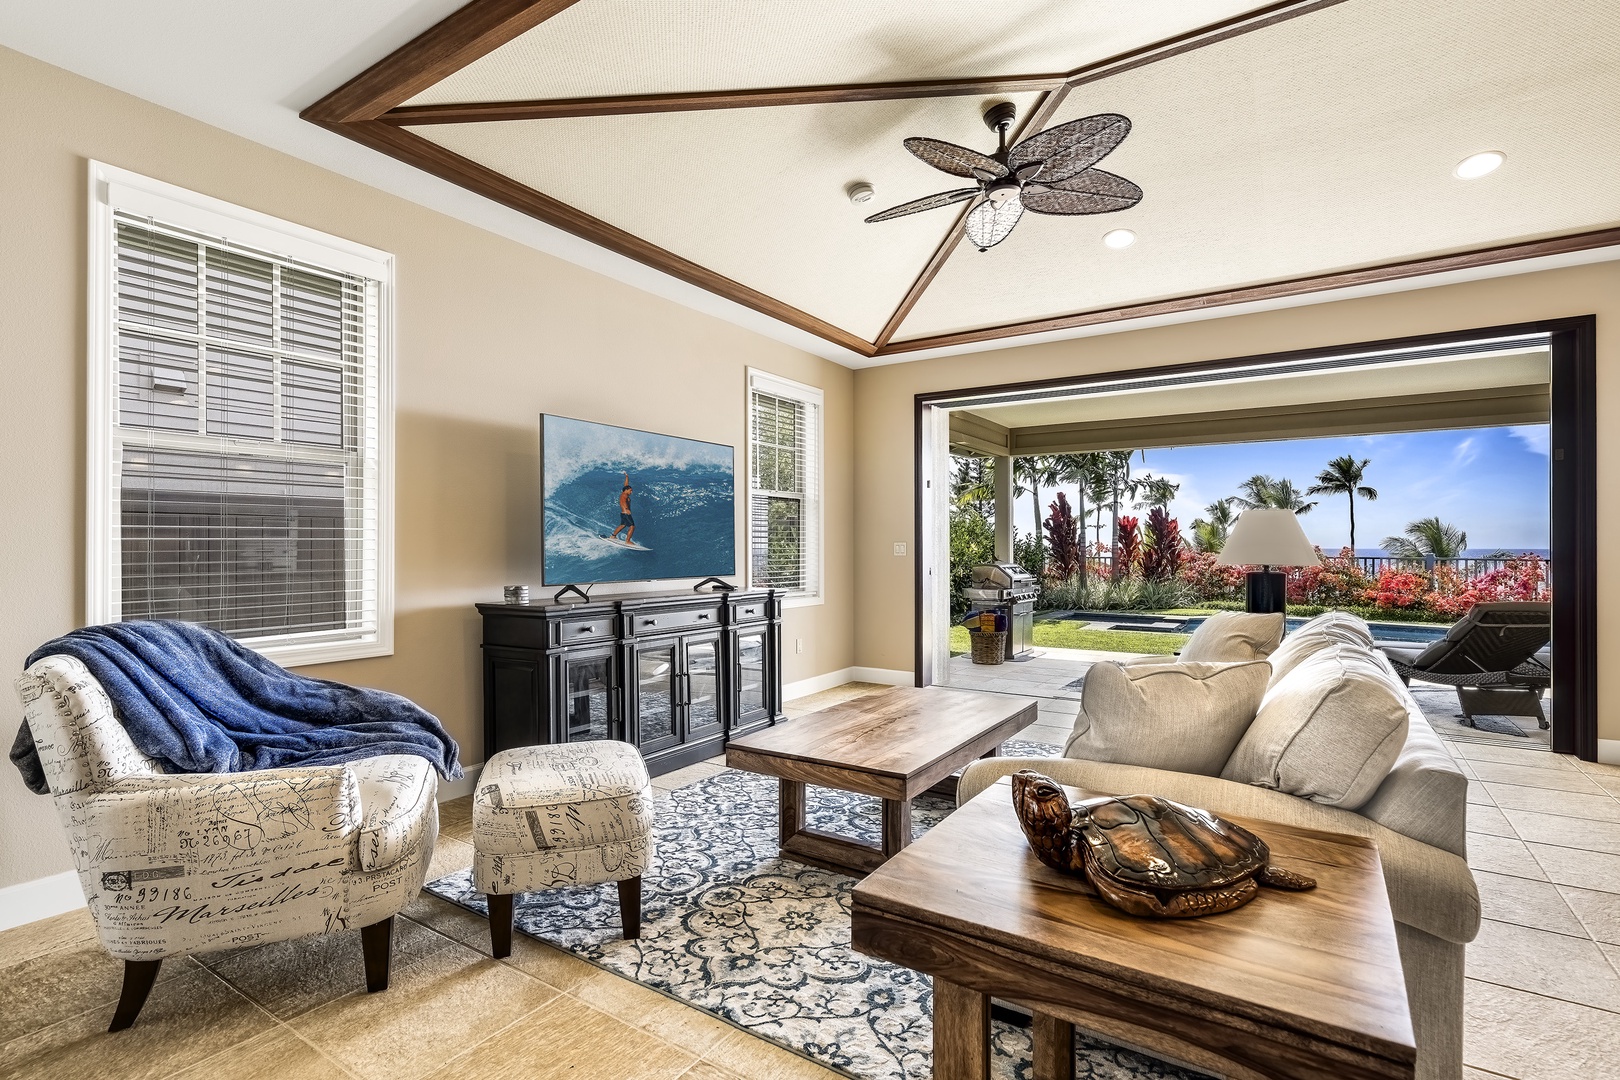 Kailua Kona Vacation Rentals, Blue Orca - Spread out and relax in the spacious living room